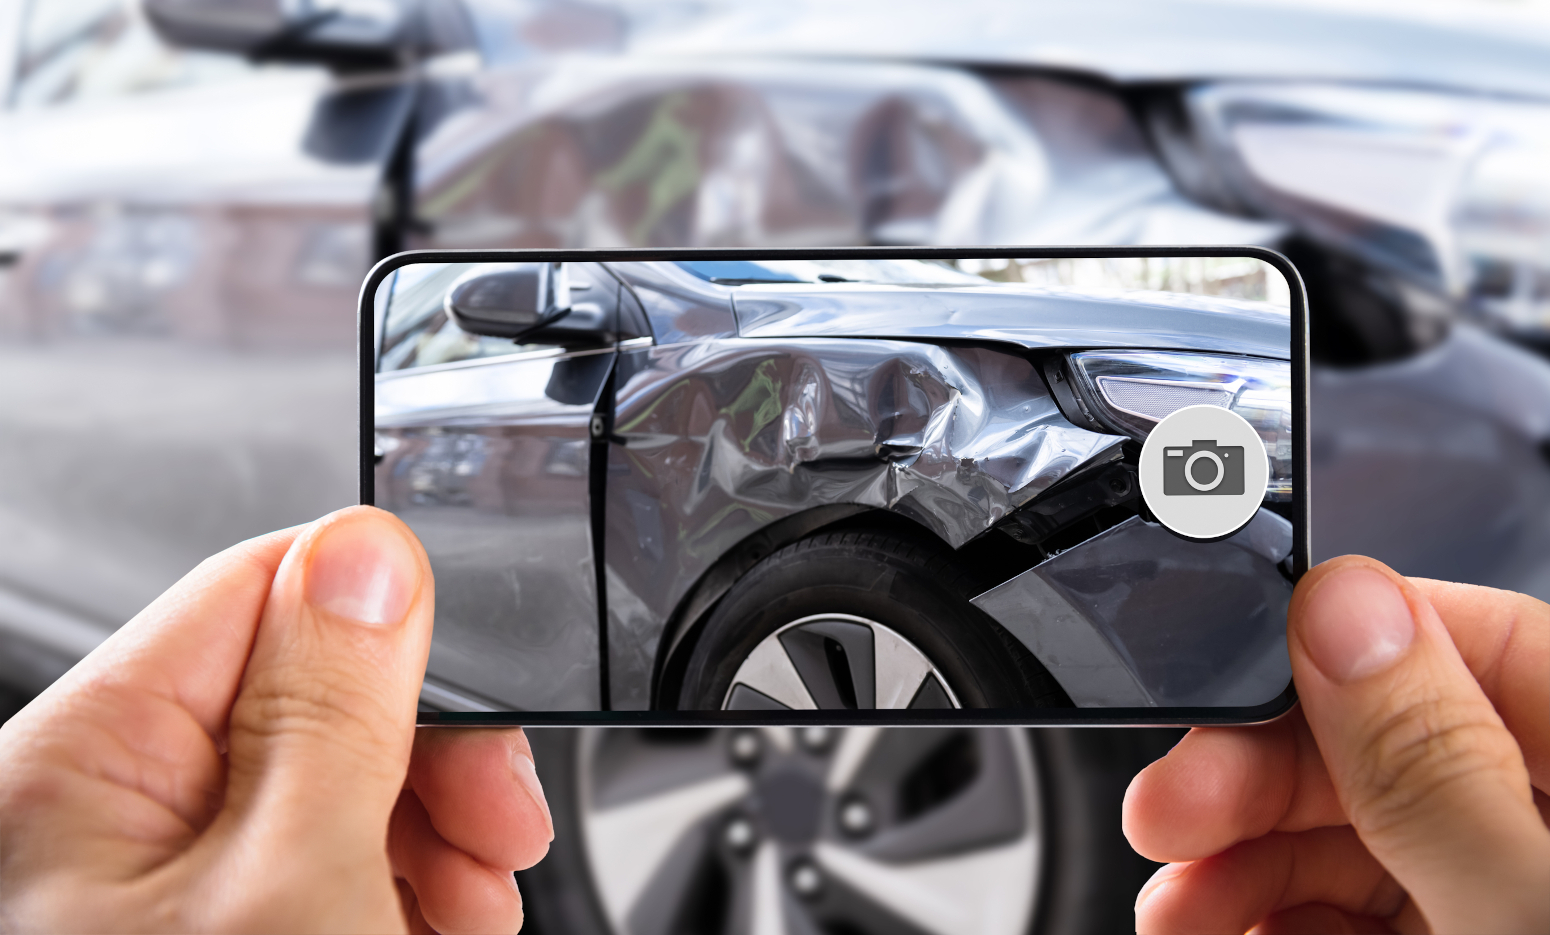 taking a picture of car accident with mobile phone